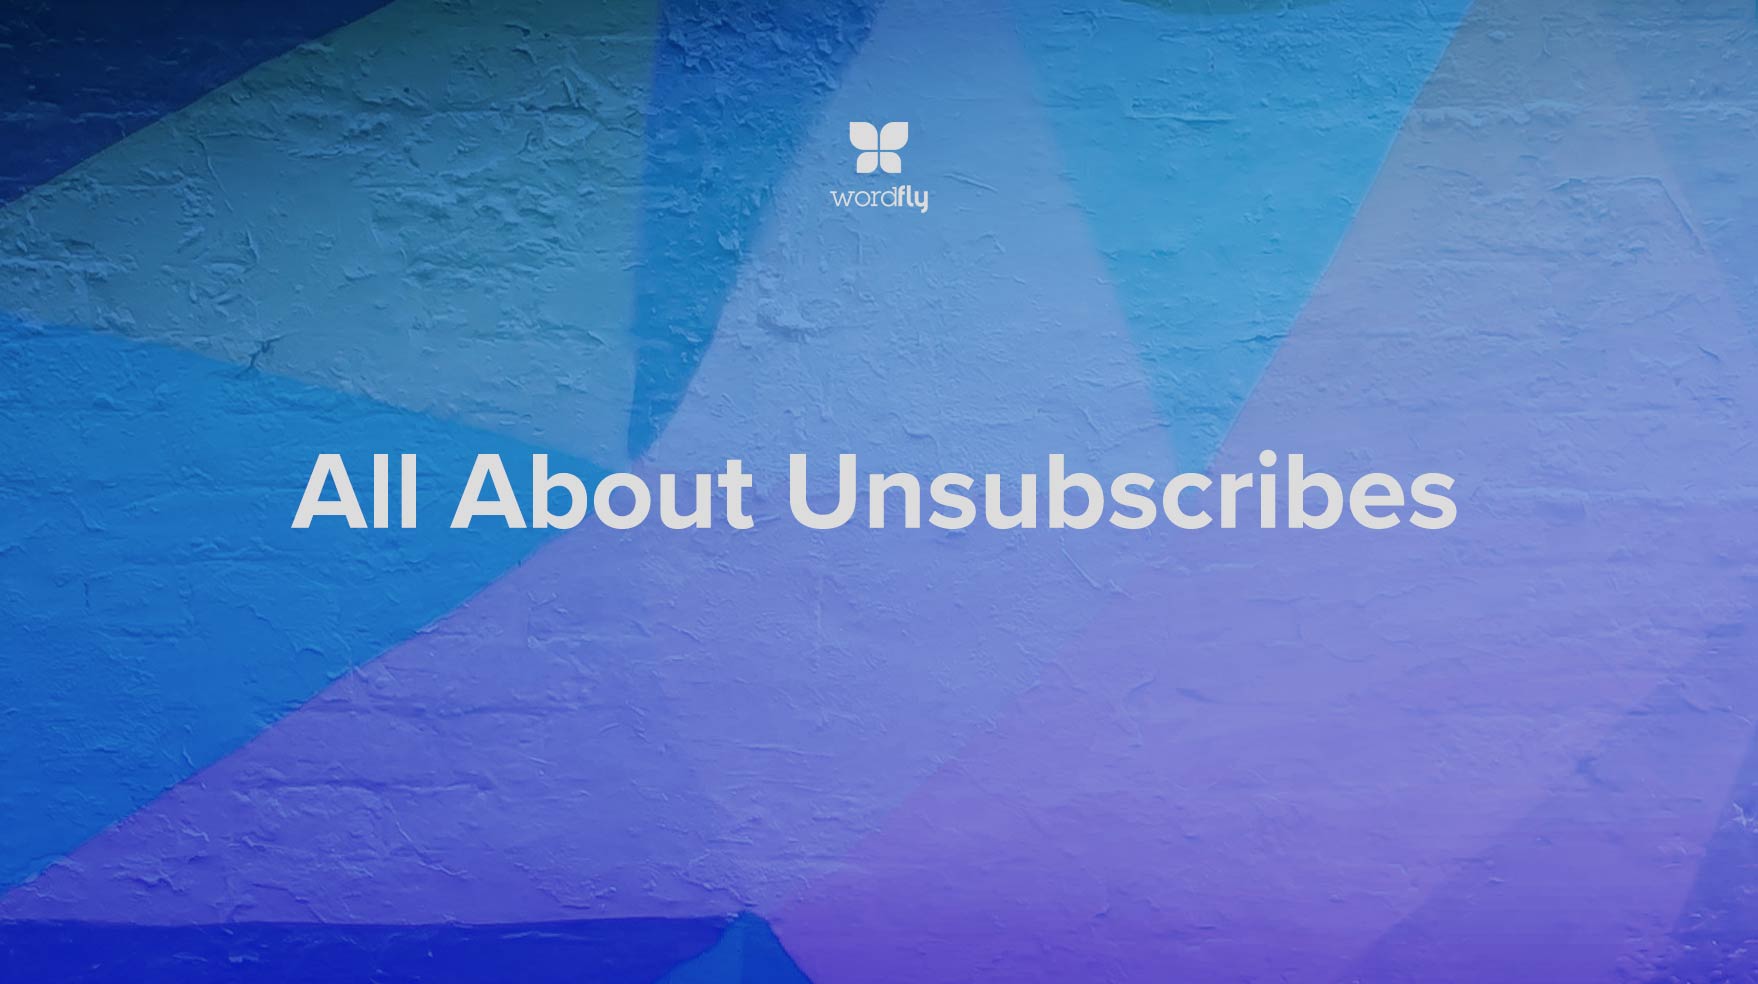 All About Unsubscribes